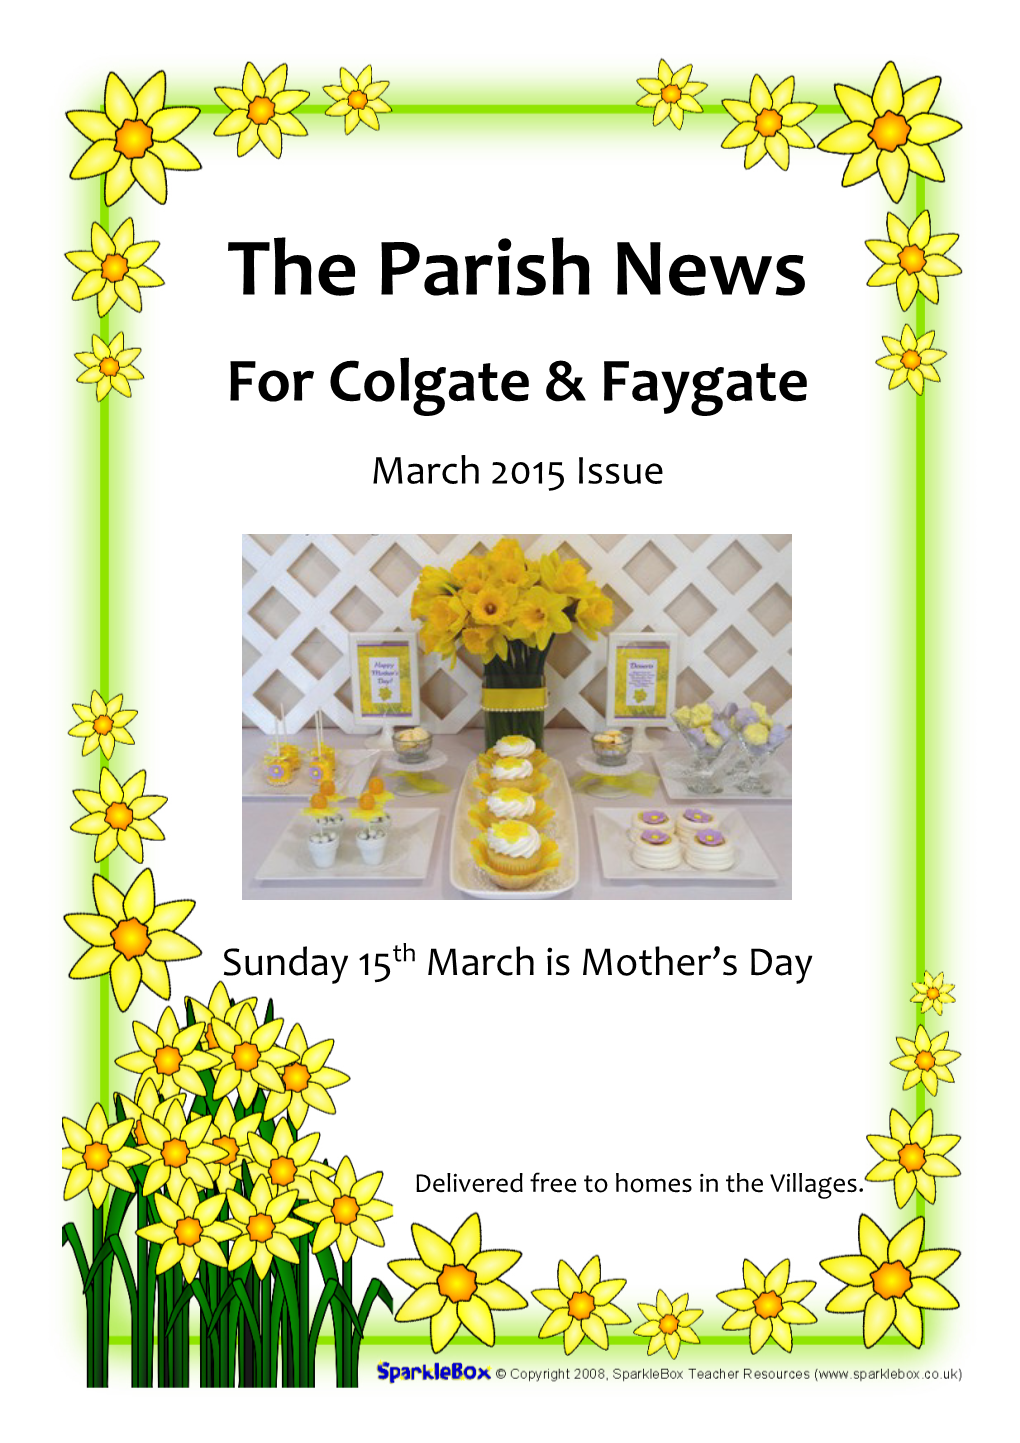 The Parish News for Colgate & Faygate